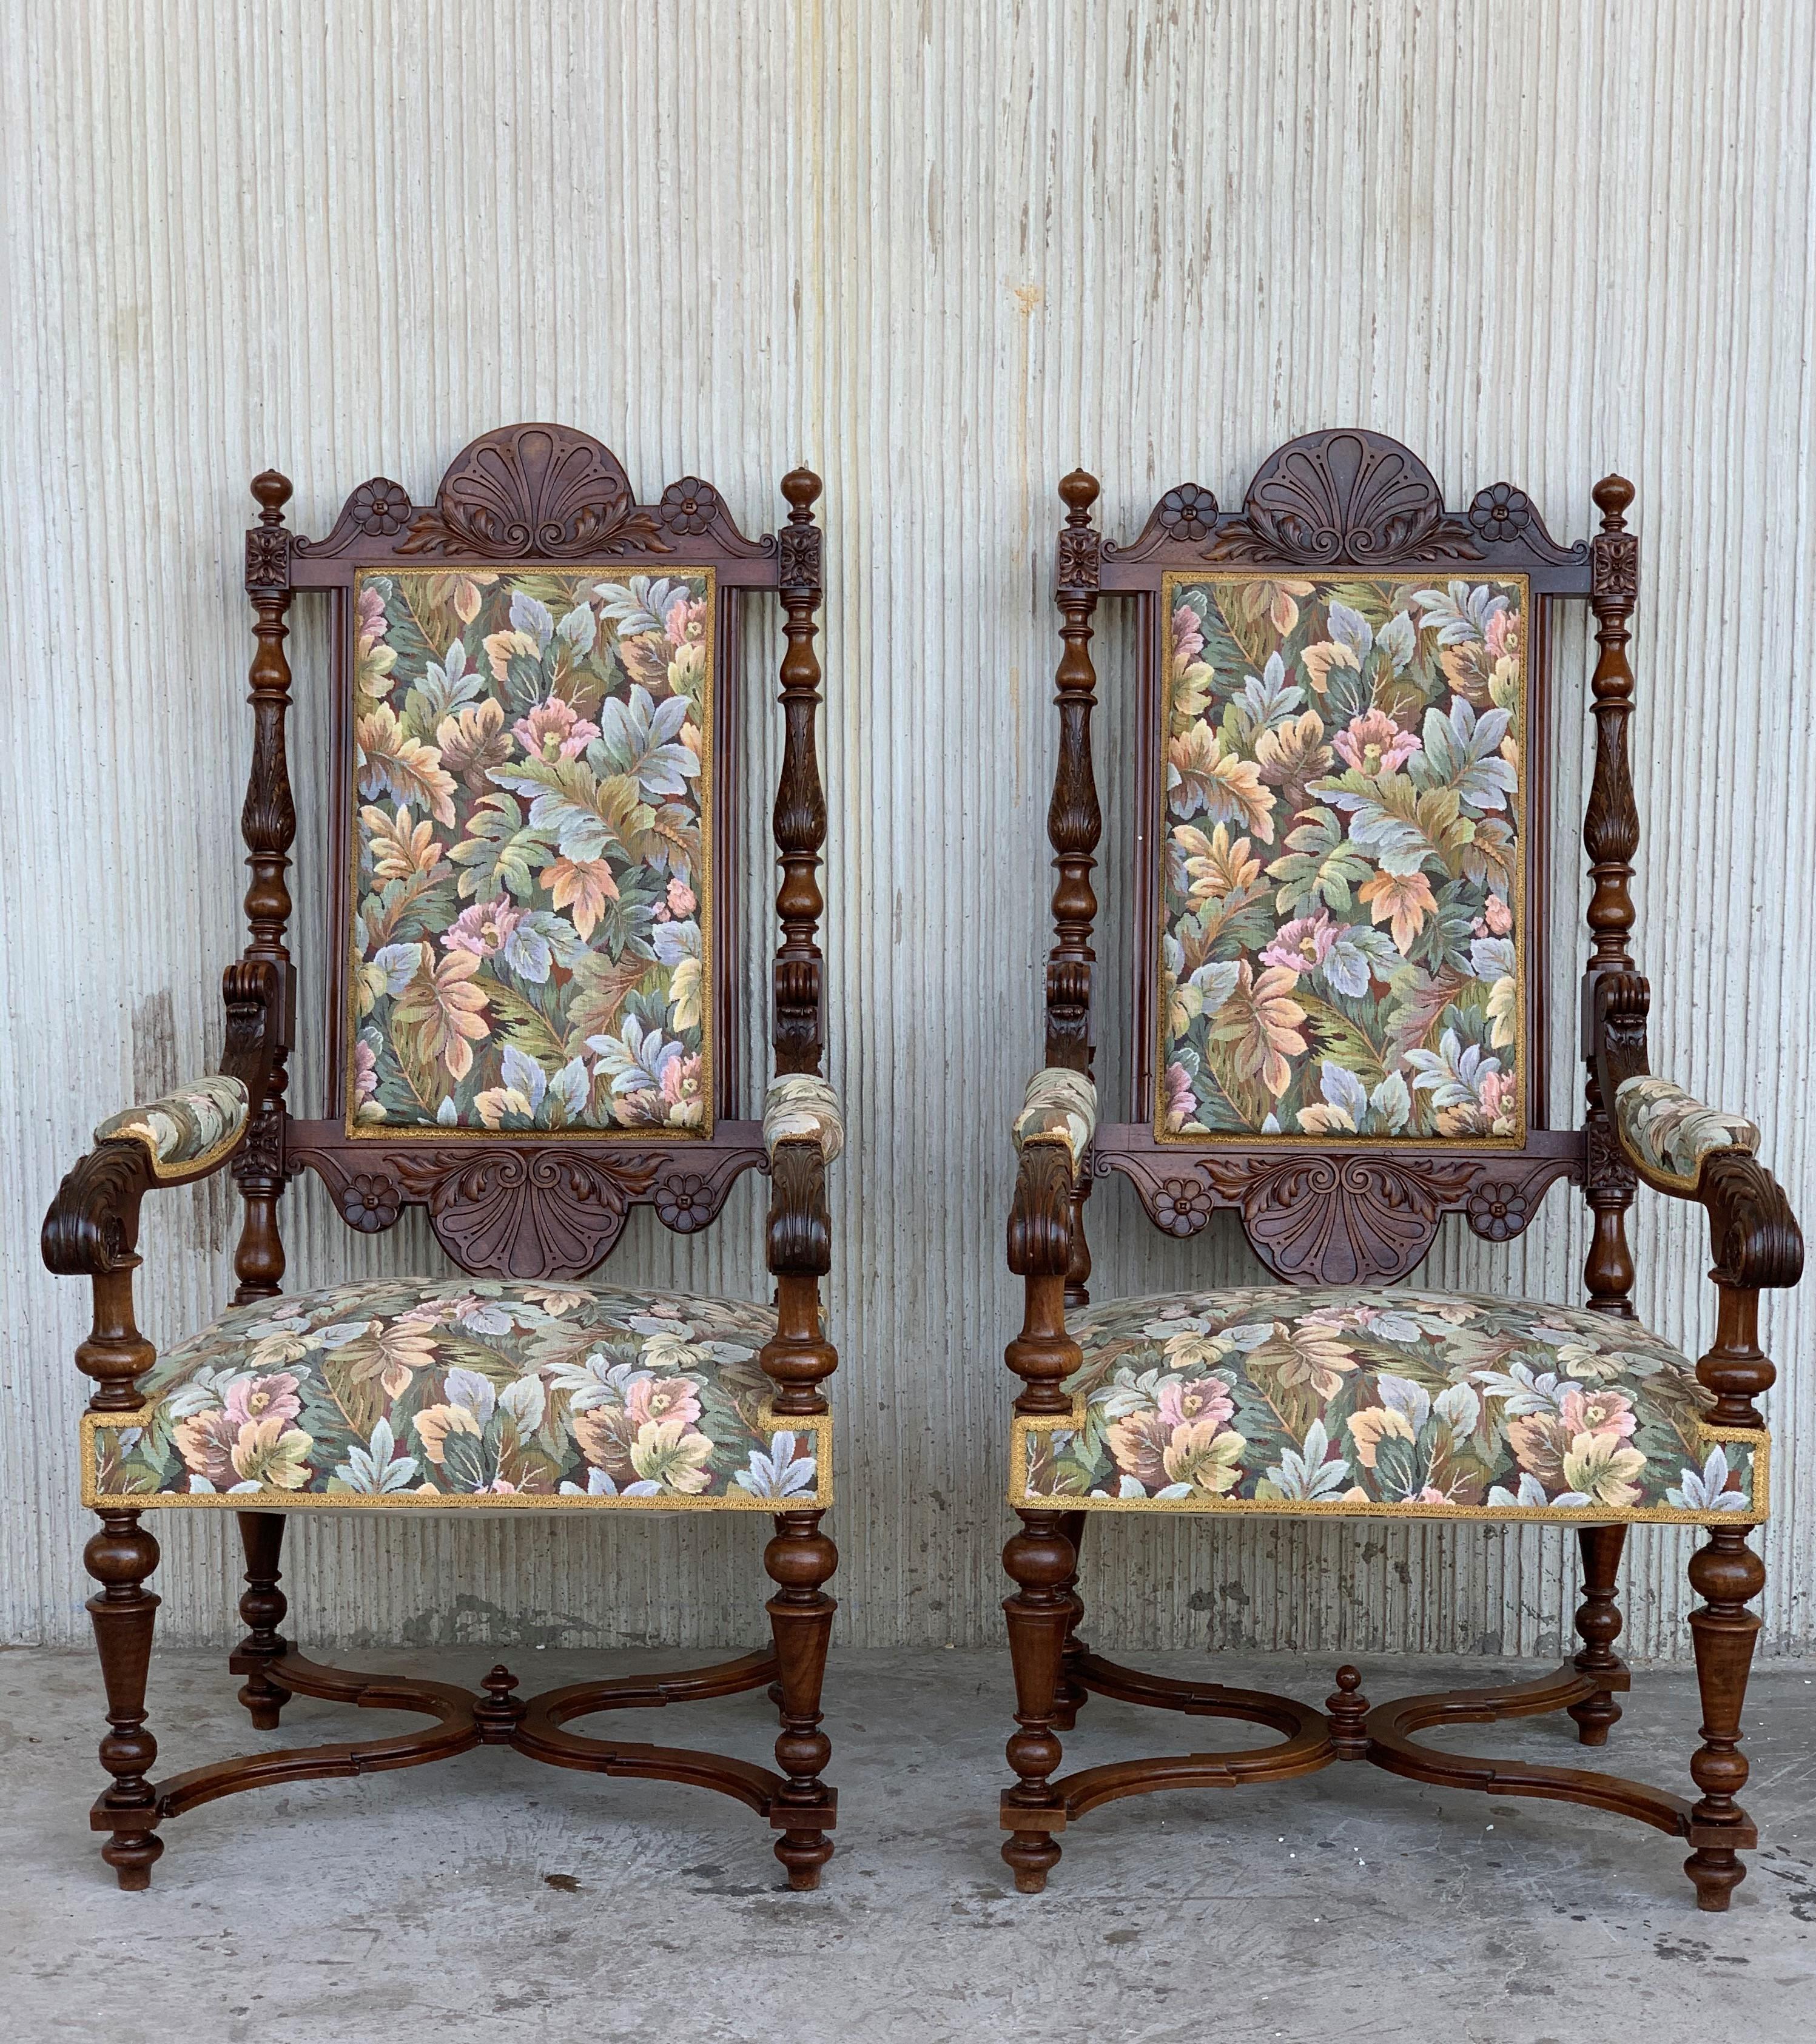 Louis XVI style pair of carved armchairs, Spain, 1900s
Good antique condition with some minor marks from used and age.
Re-upholstered from last owner with high quality fabric, 20/25 years ago.

Measure: Height to the arm: 27.16in.